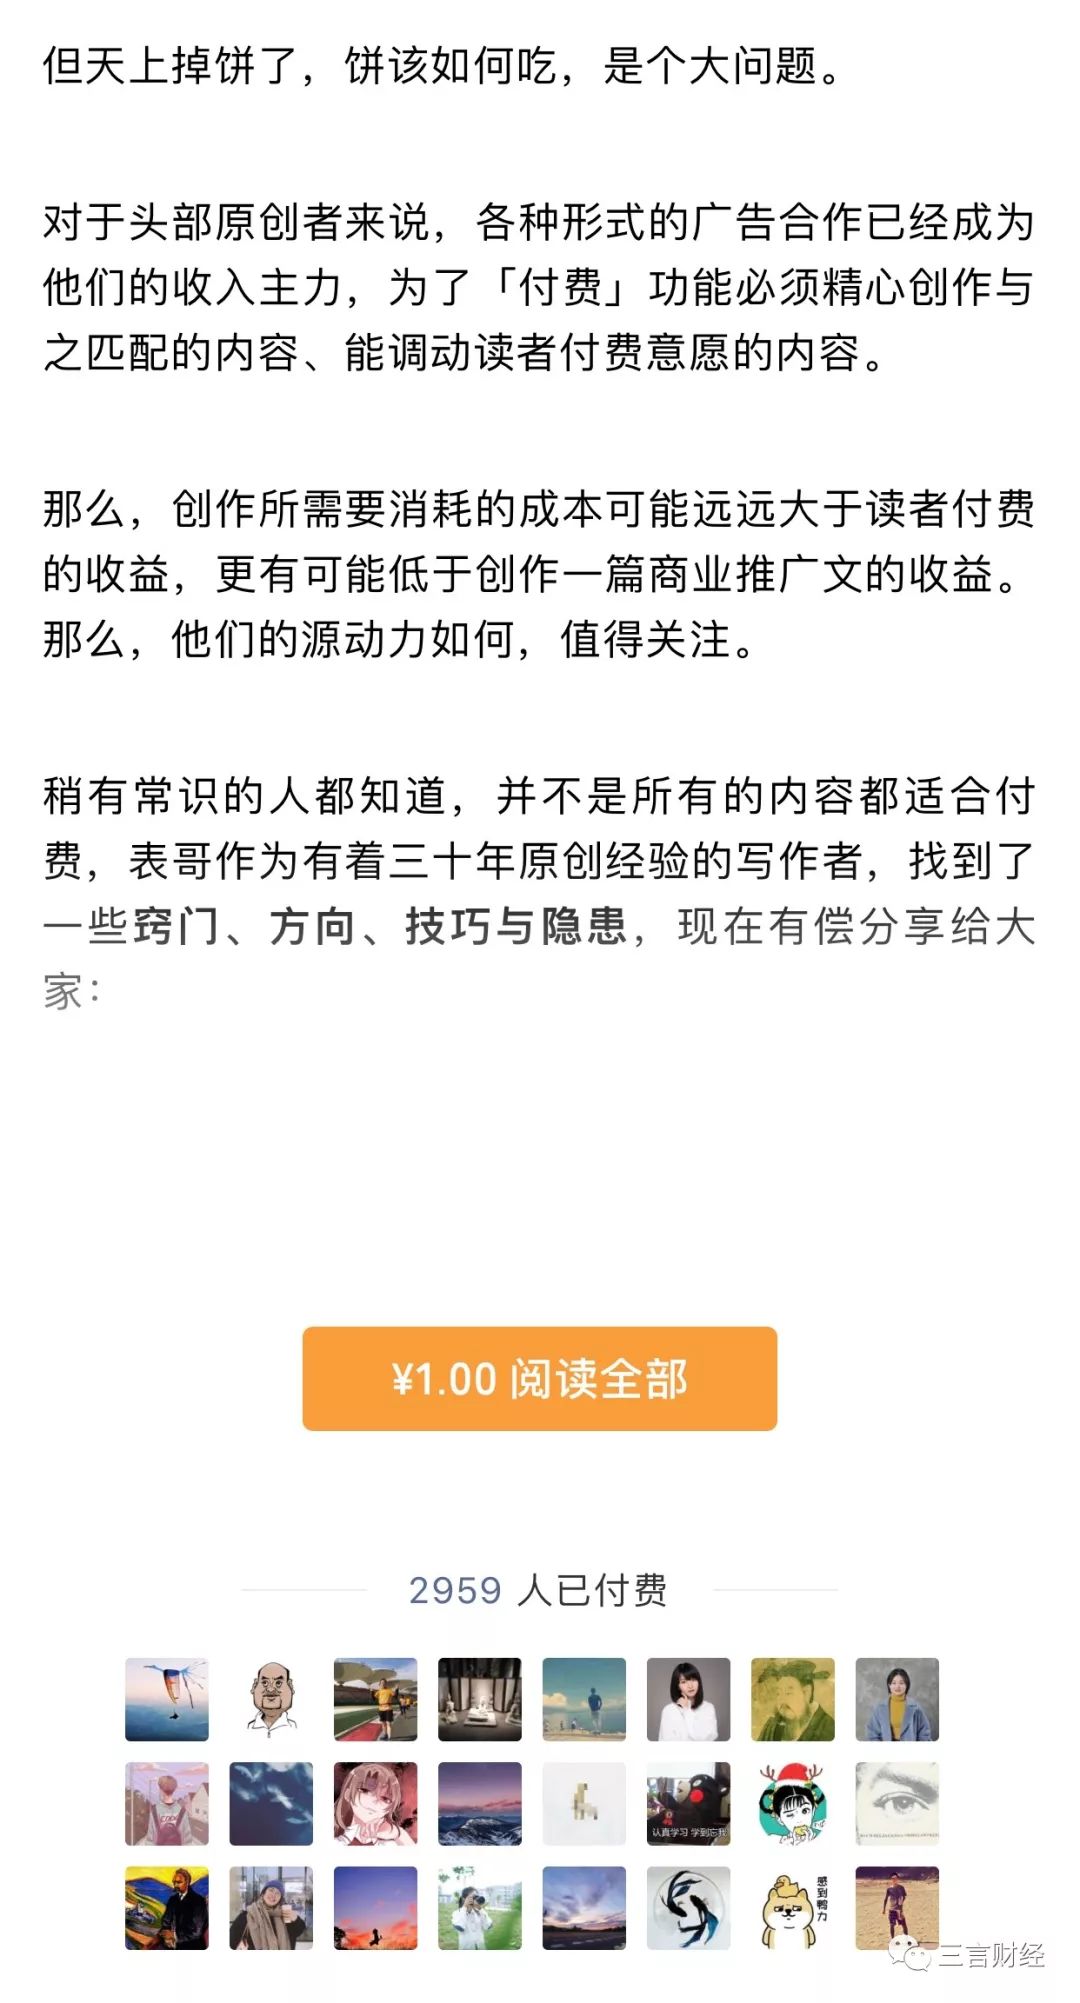 WeChat paid reading looks like this:  The reading volume is not displayed, you can leave a message after paying 